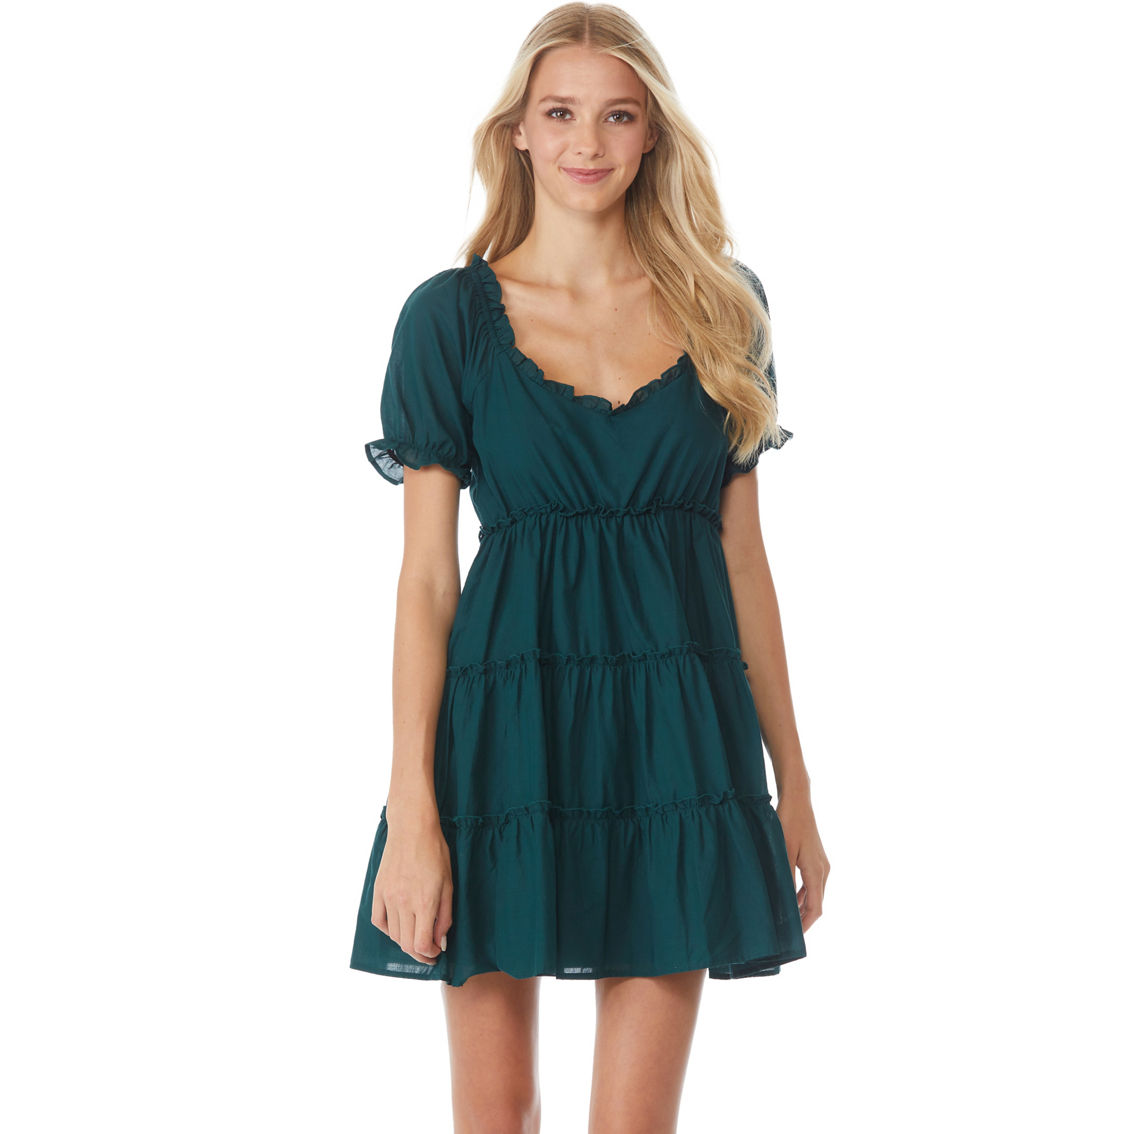 Bailey Blue Juniors Cotton Tiered Puff Sleeve Dress - Image 3 of 3